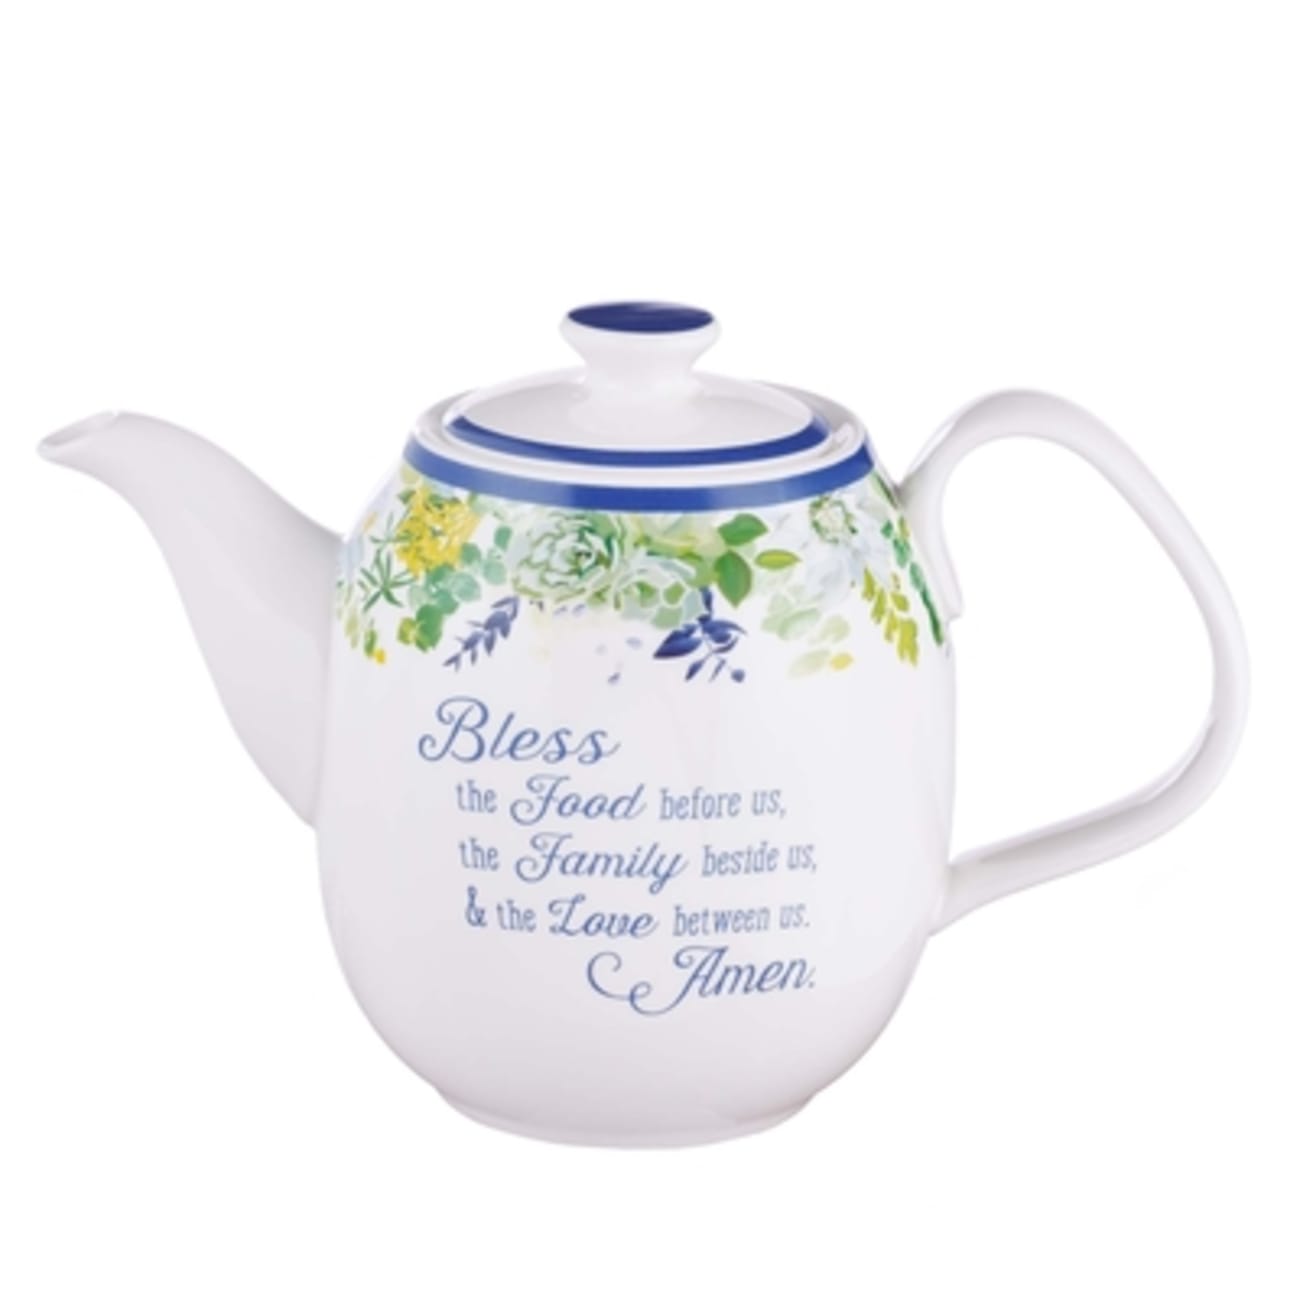 Ceramic Teapot: Our Daily Bread, Blue/White/Floral (Matt 6:11) (Our Daily Bread Collection) Homeware